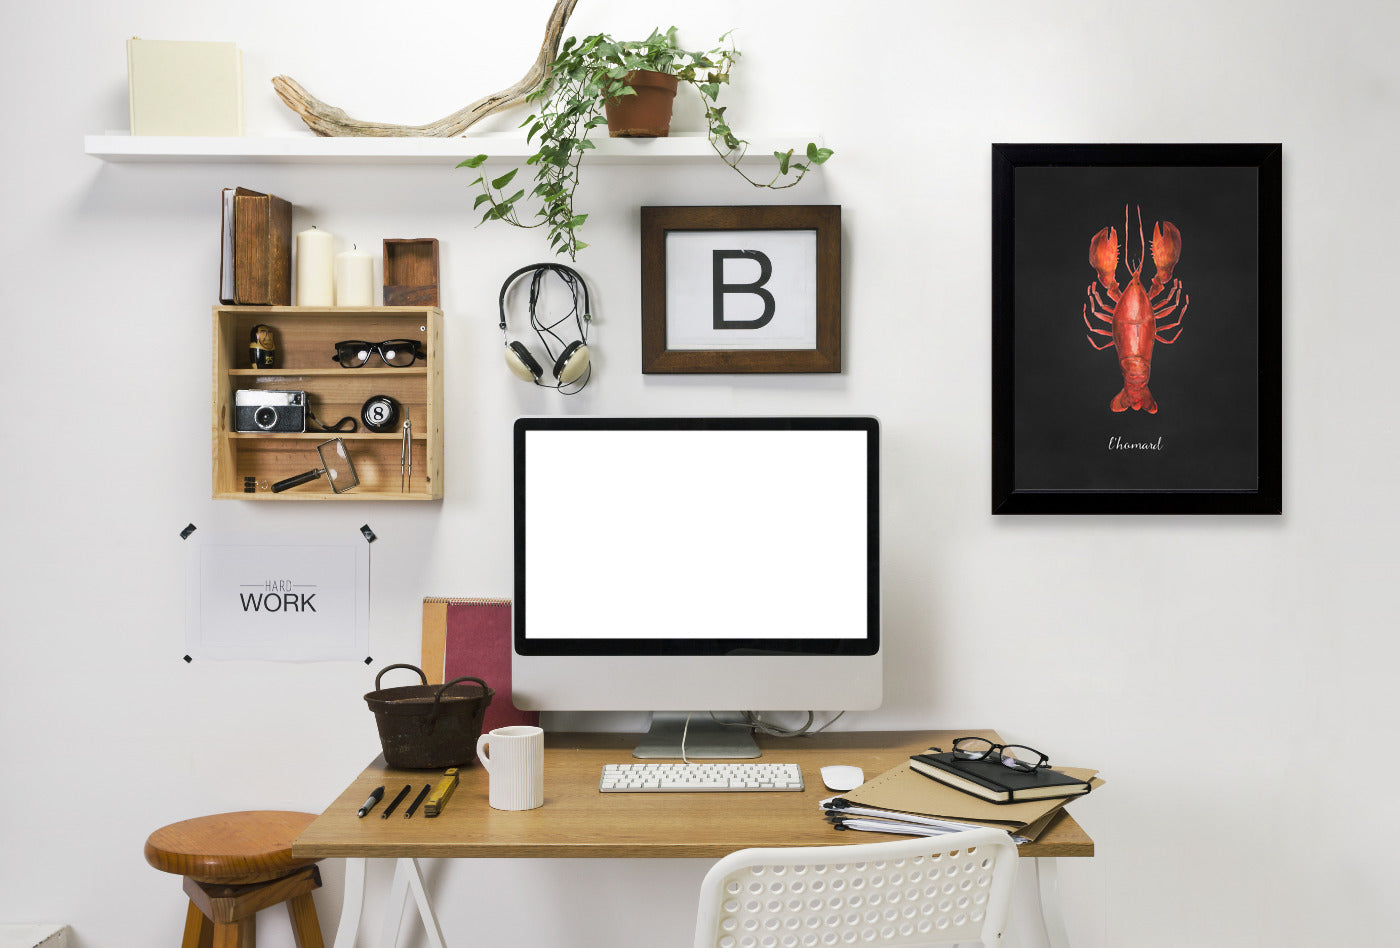 French Seafood Lobster by Samantha Ranlet Framed Print - Americanflat